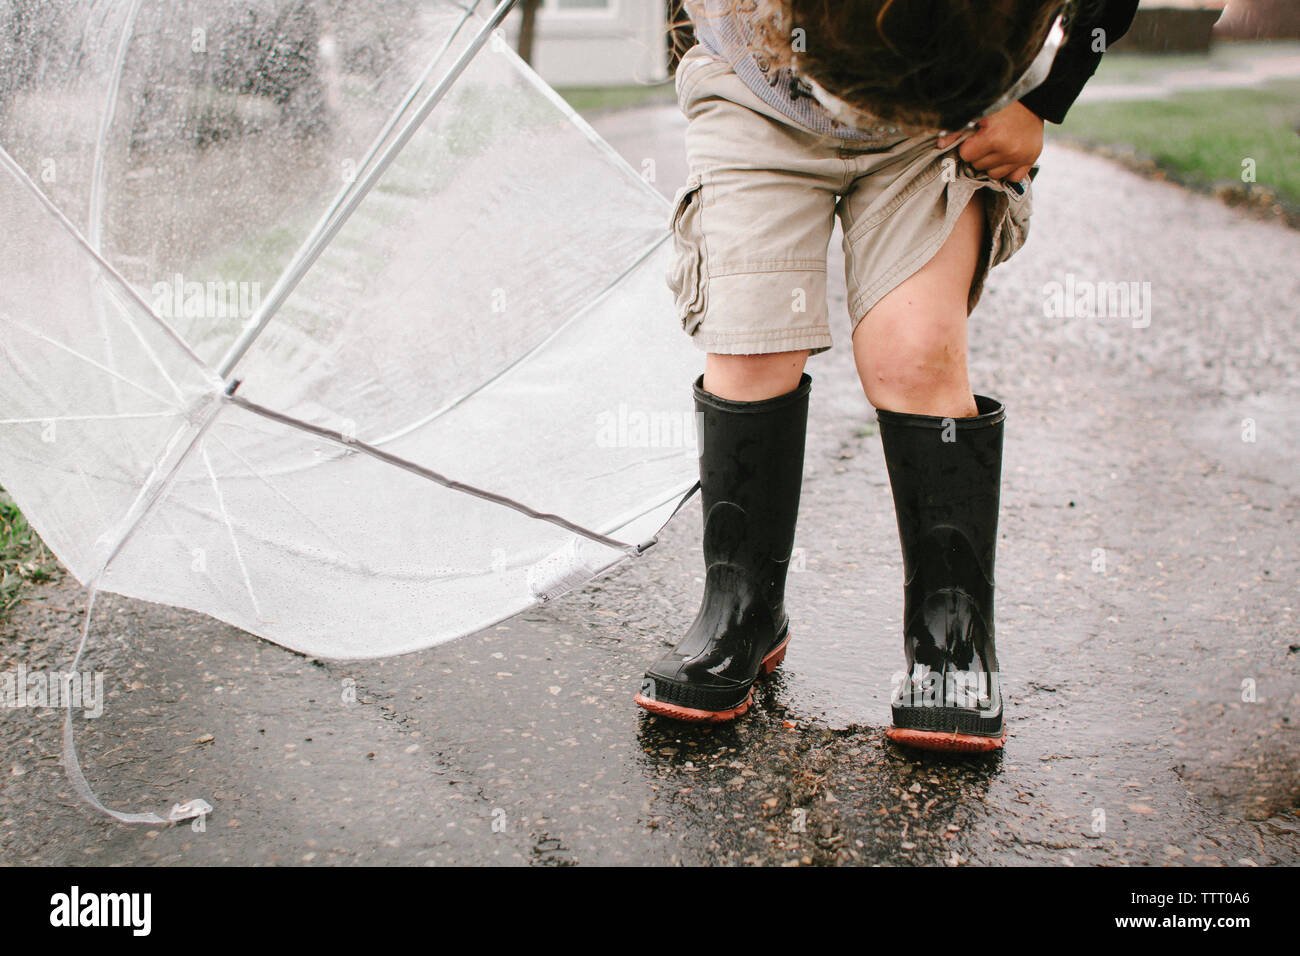 Girl in rubber boots holding umbrella while standing on wet road Stock Photo